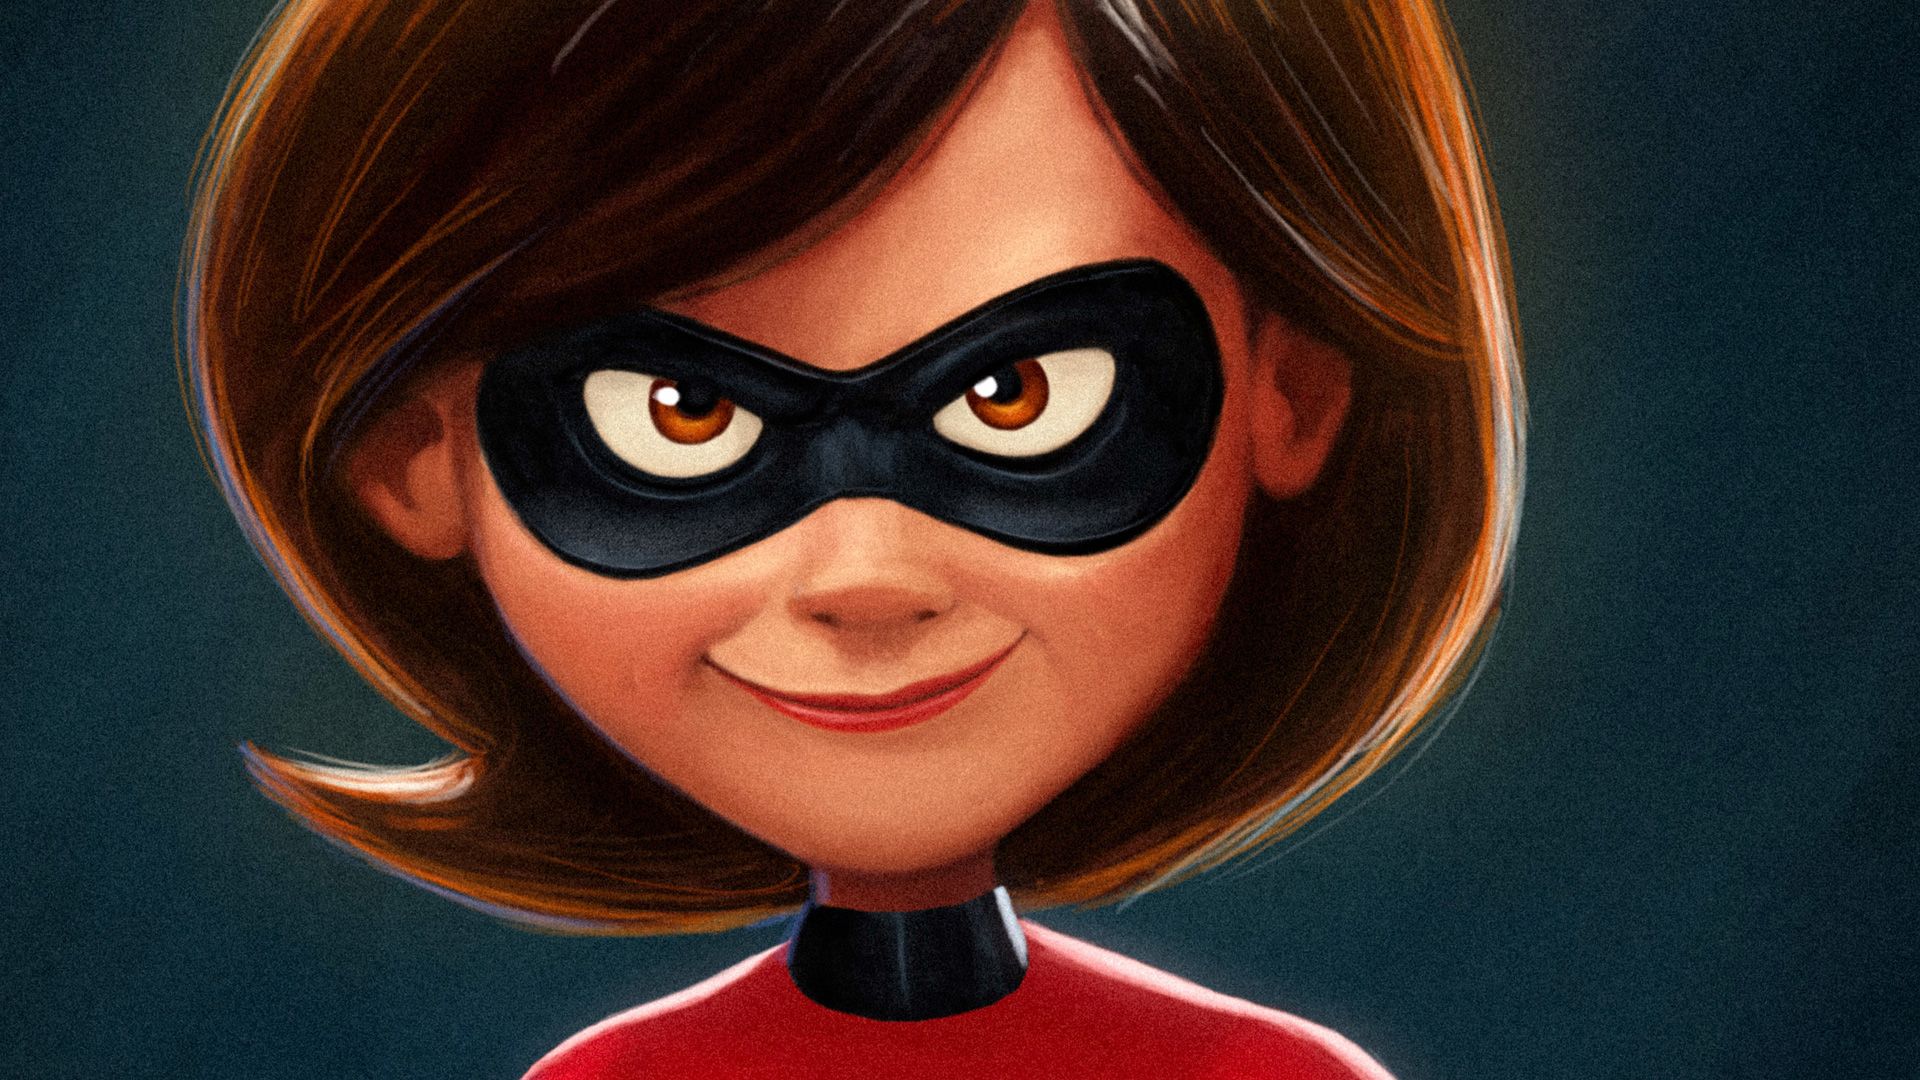 1920x1080 Elastigirl In The Incredibles 2 Movie Hd Movies 4k Wallpaper Image Background Photo And Picture